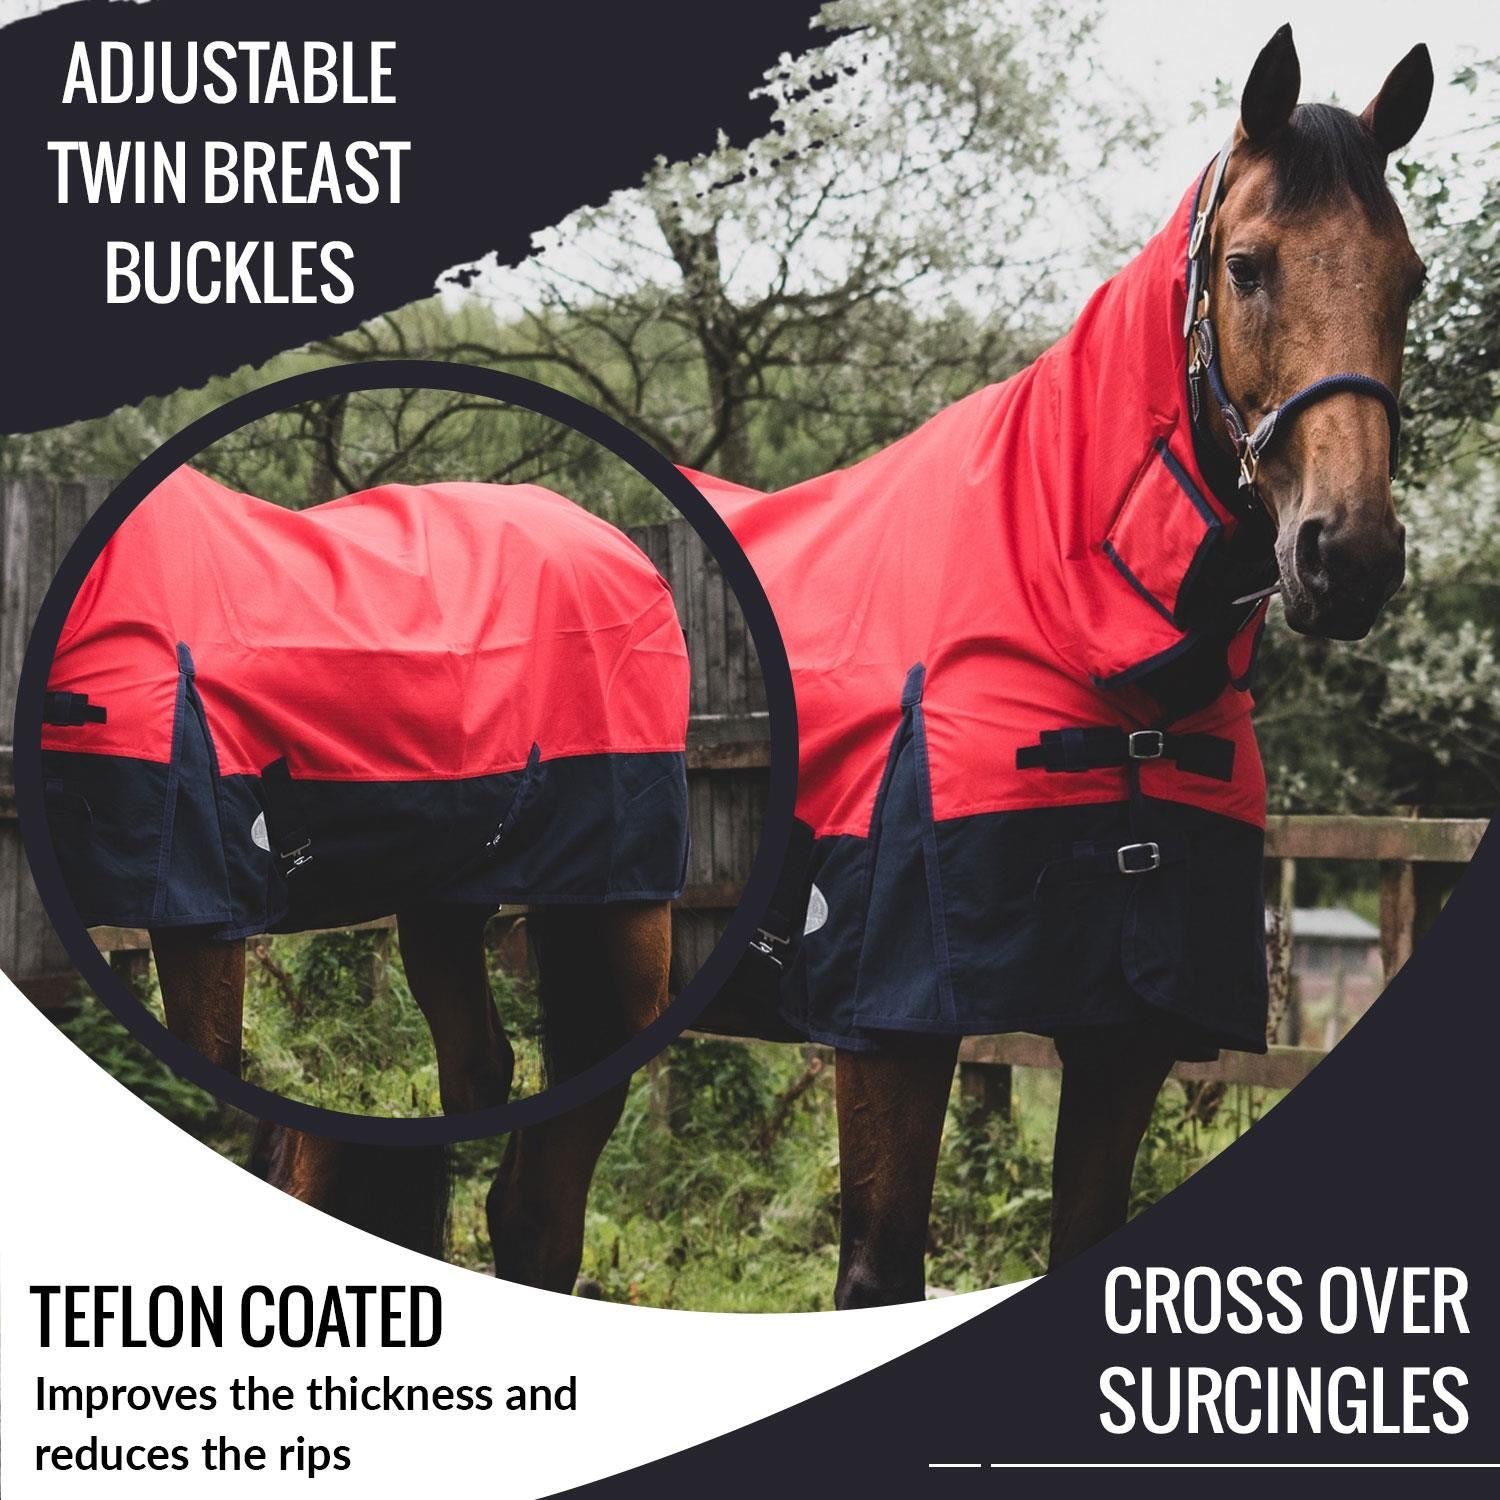 600D Outdoor Winter Turnout Horse Rugs 350G Fill Combo Neck Red/Navy 5'3-6'9 - Tack24